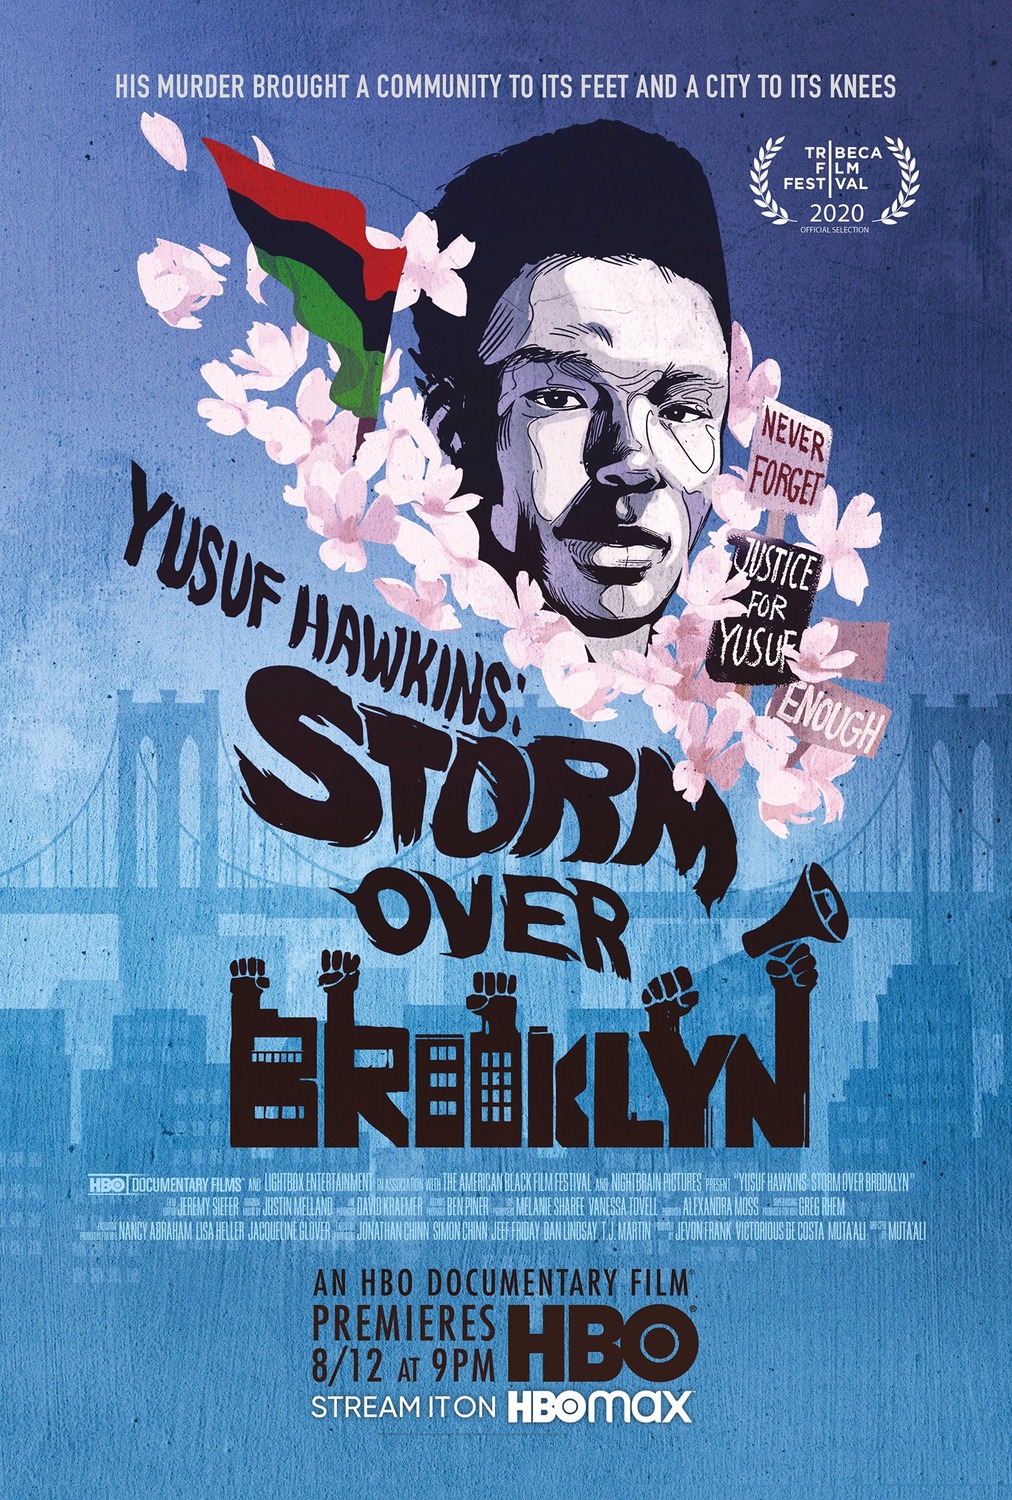 Extra Large TV Poster Image for Yusuf Hawkins: Storm Over Brooklyn 